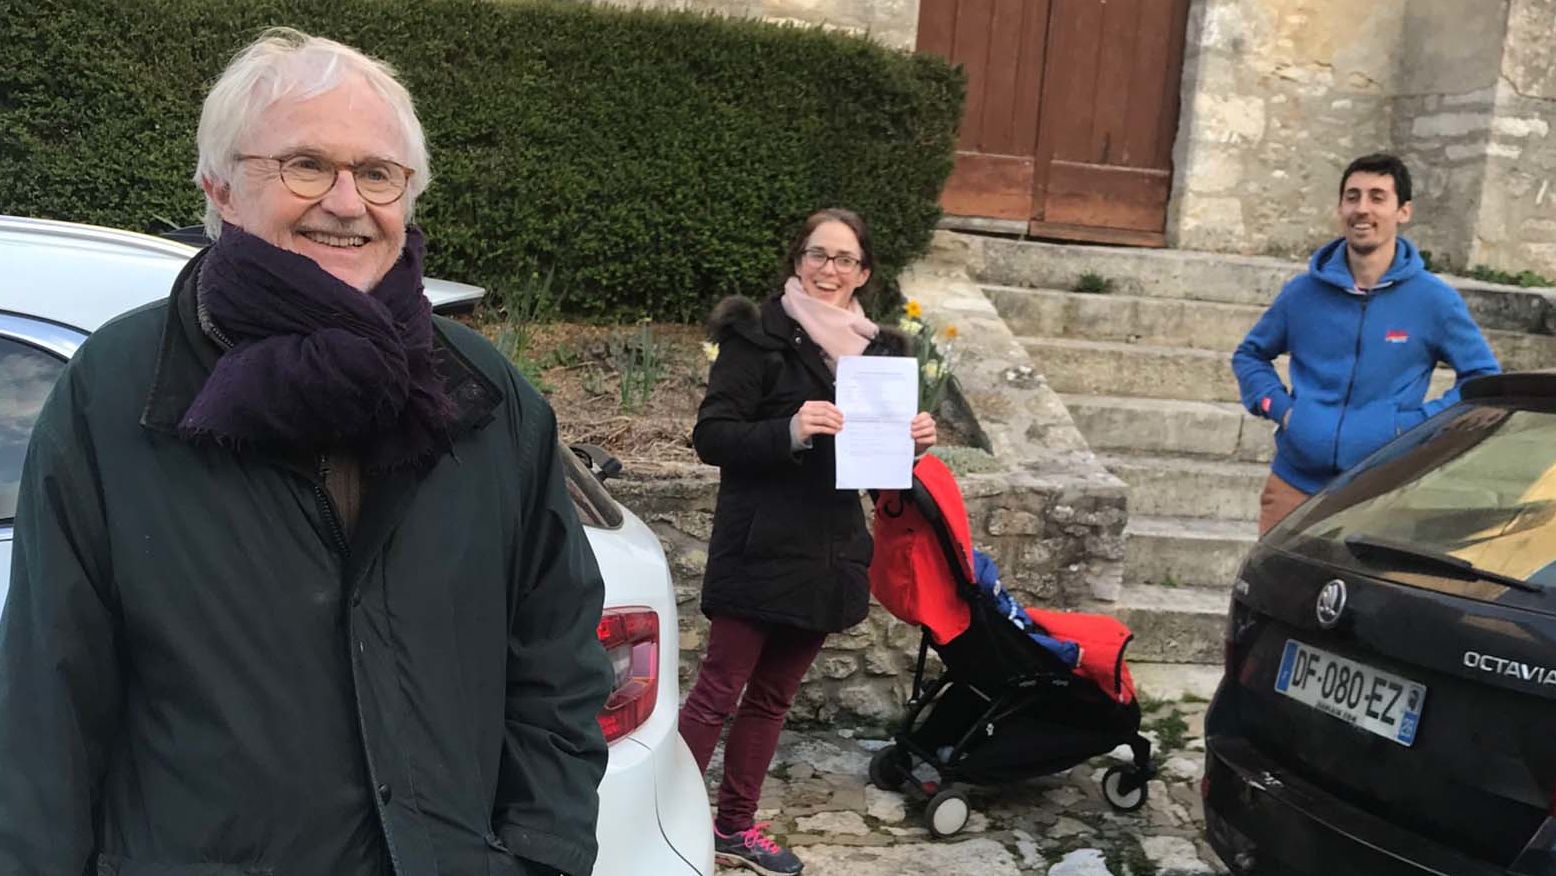 Neighbors Alain de Gourdon and his family out for a walk while social distancing. De Gourdon's daughter holds up the paperwork needed. 